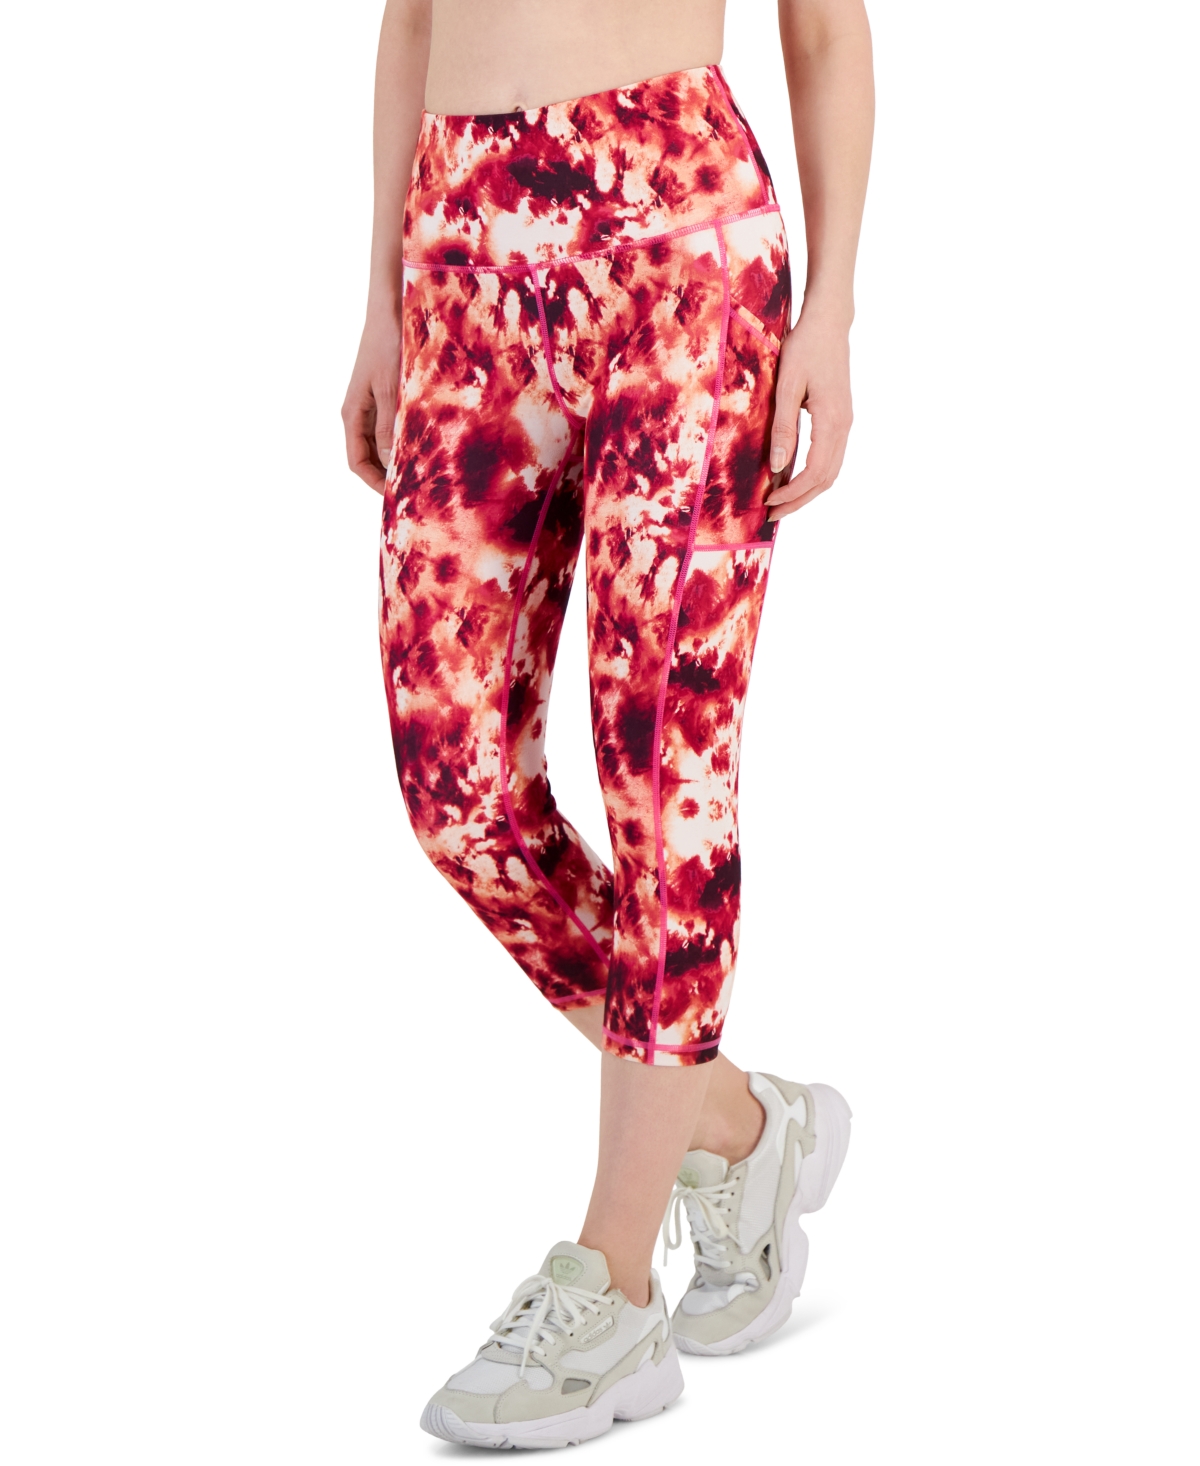 Women's Compression Printed Crop Side-Pocket Leggings, Created for Macy's - Pink Shock